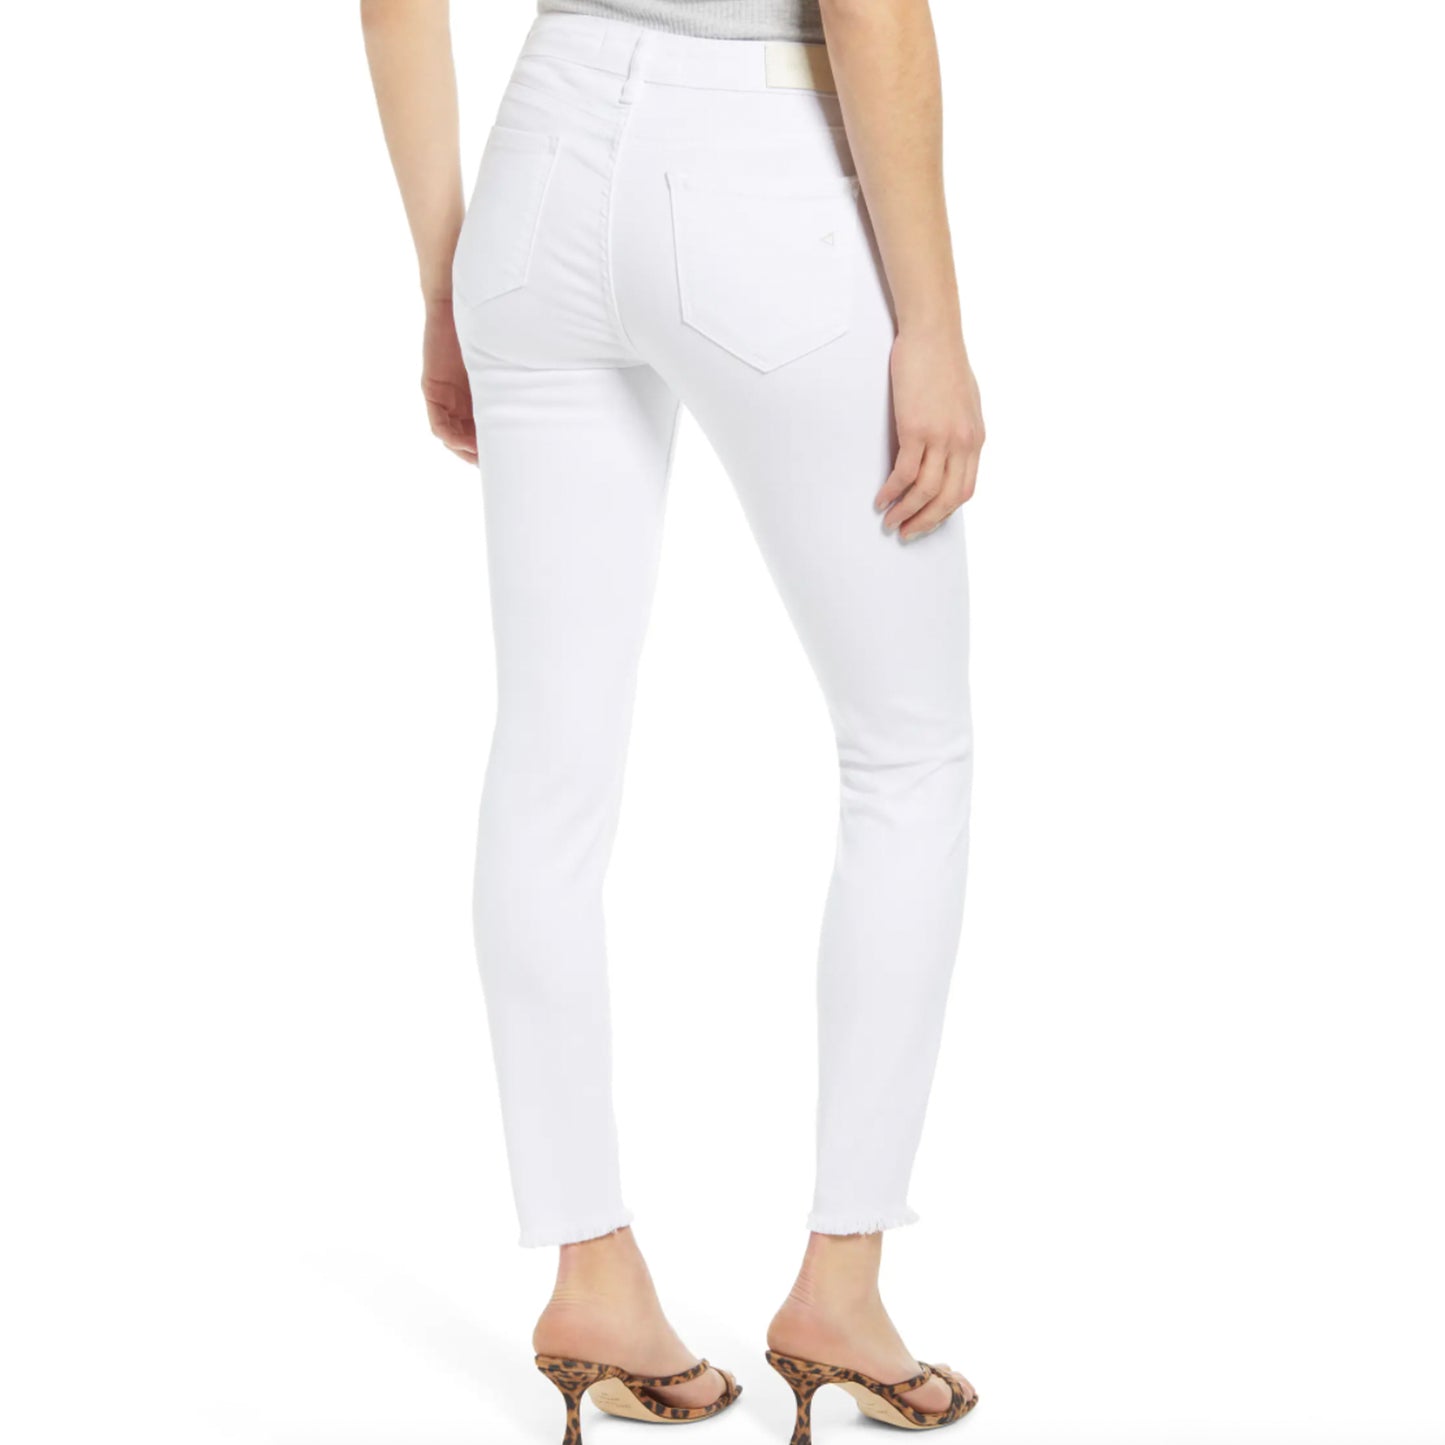 Hidden Amelia Mid Rise Frayed Hem Skinny Jeans. Welcome white-jeans season in this stretch-kissed pair of jeans finished with a trendy frayed hem